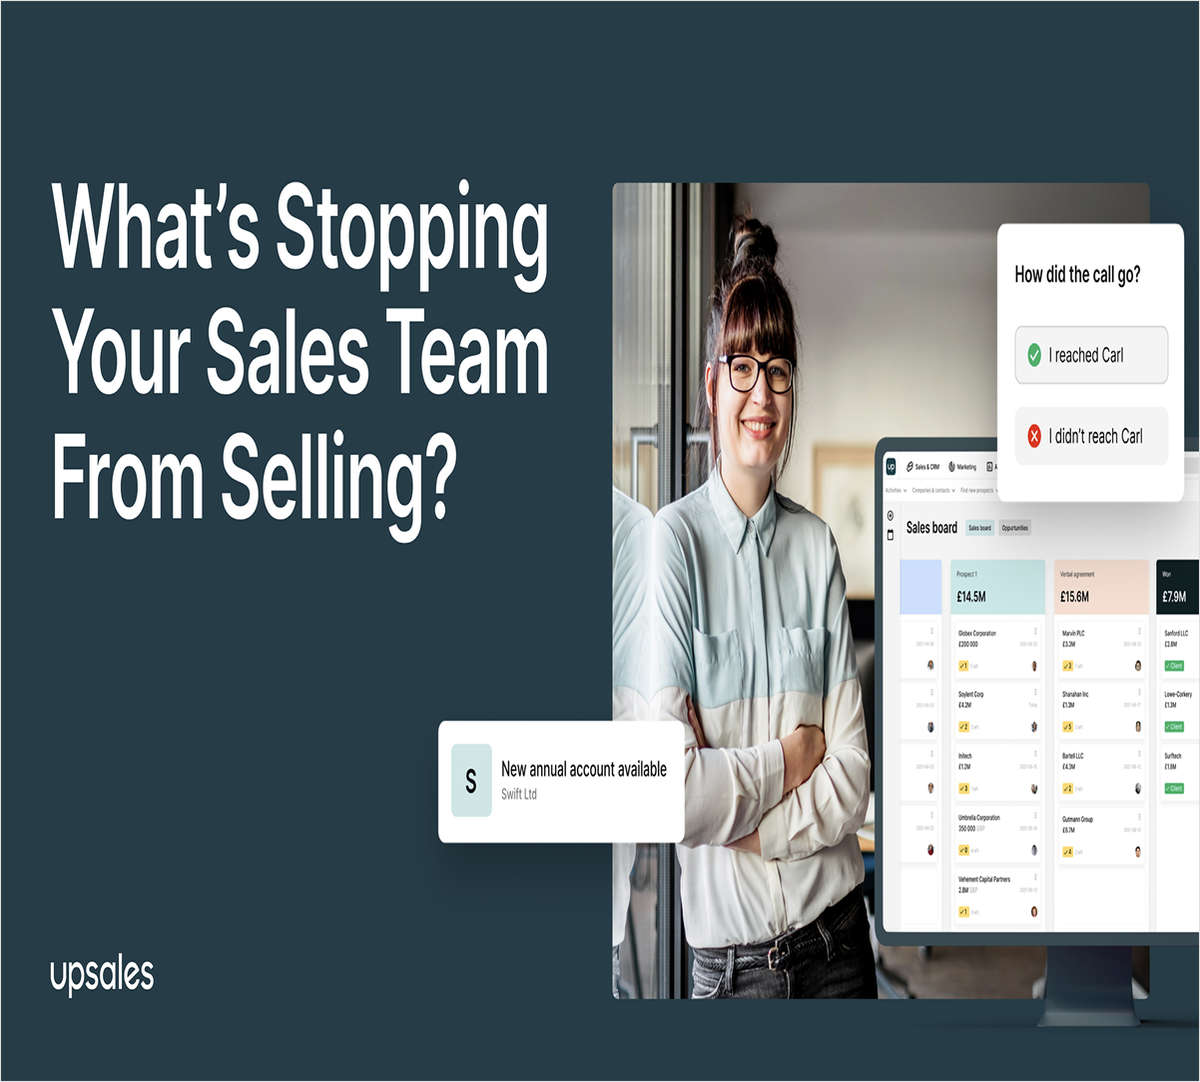 What's stopping your sales team from selling